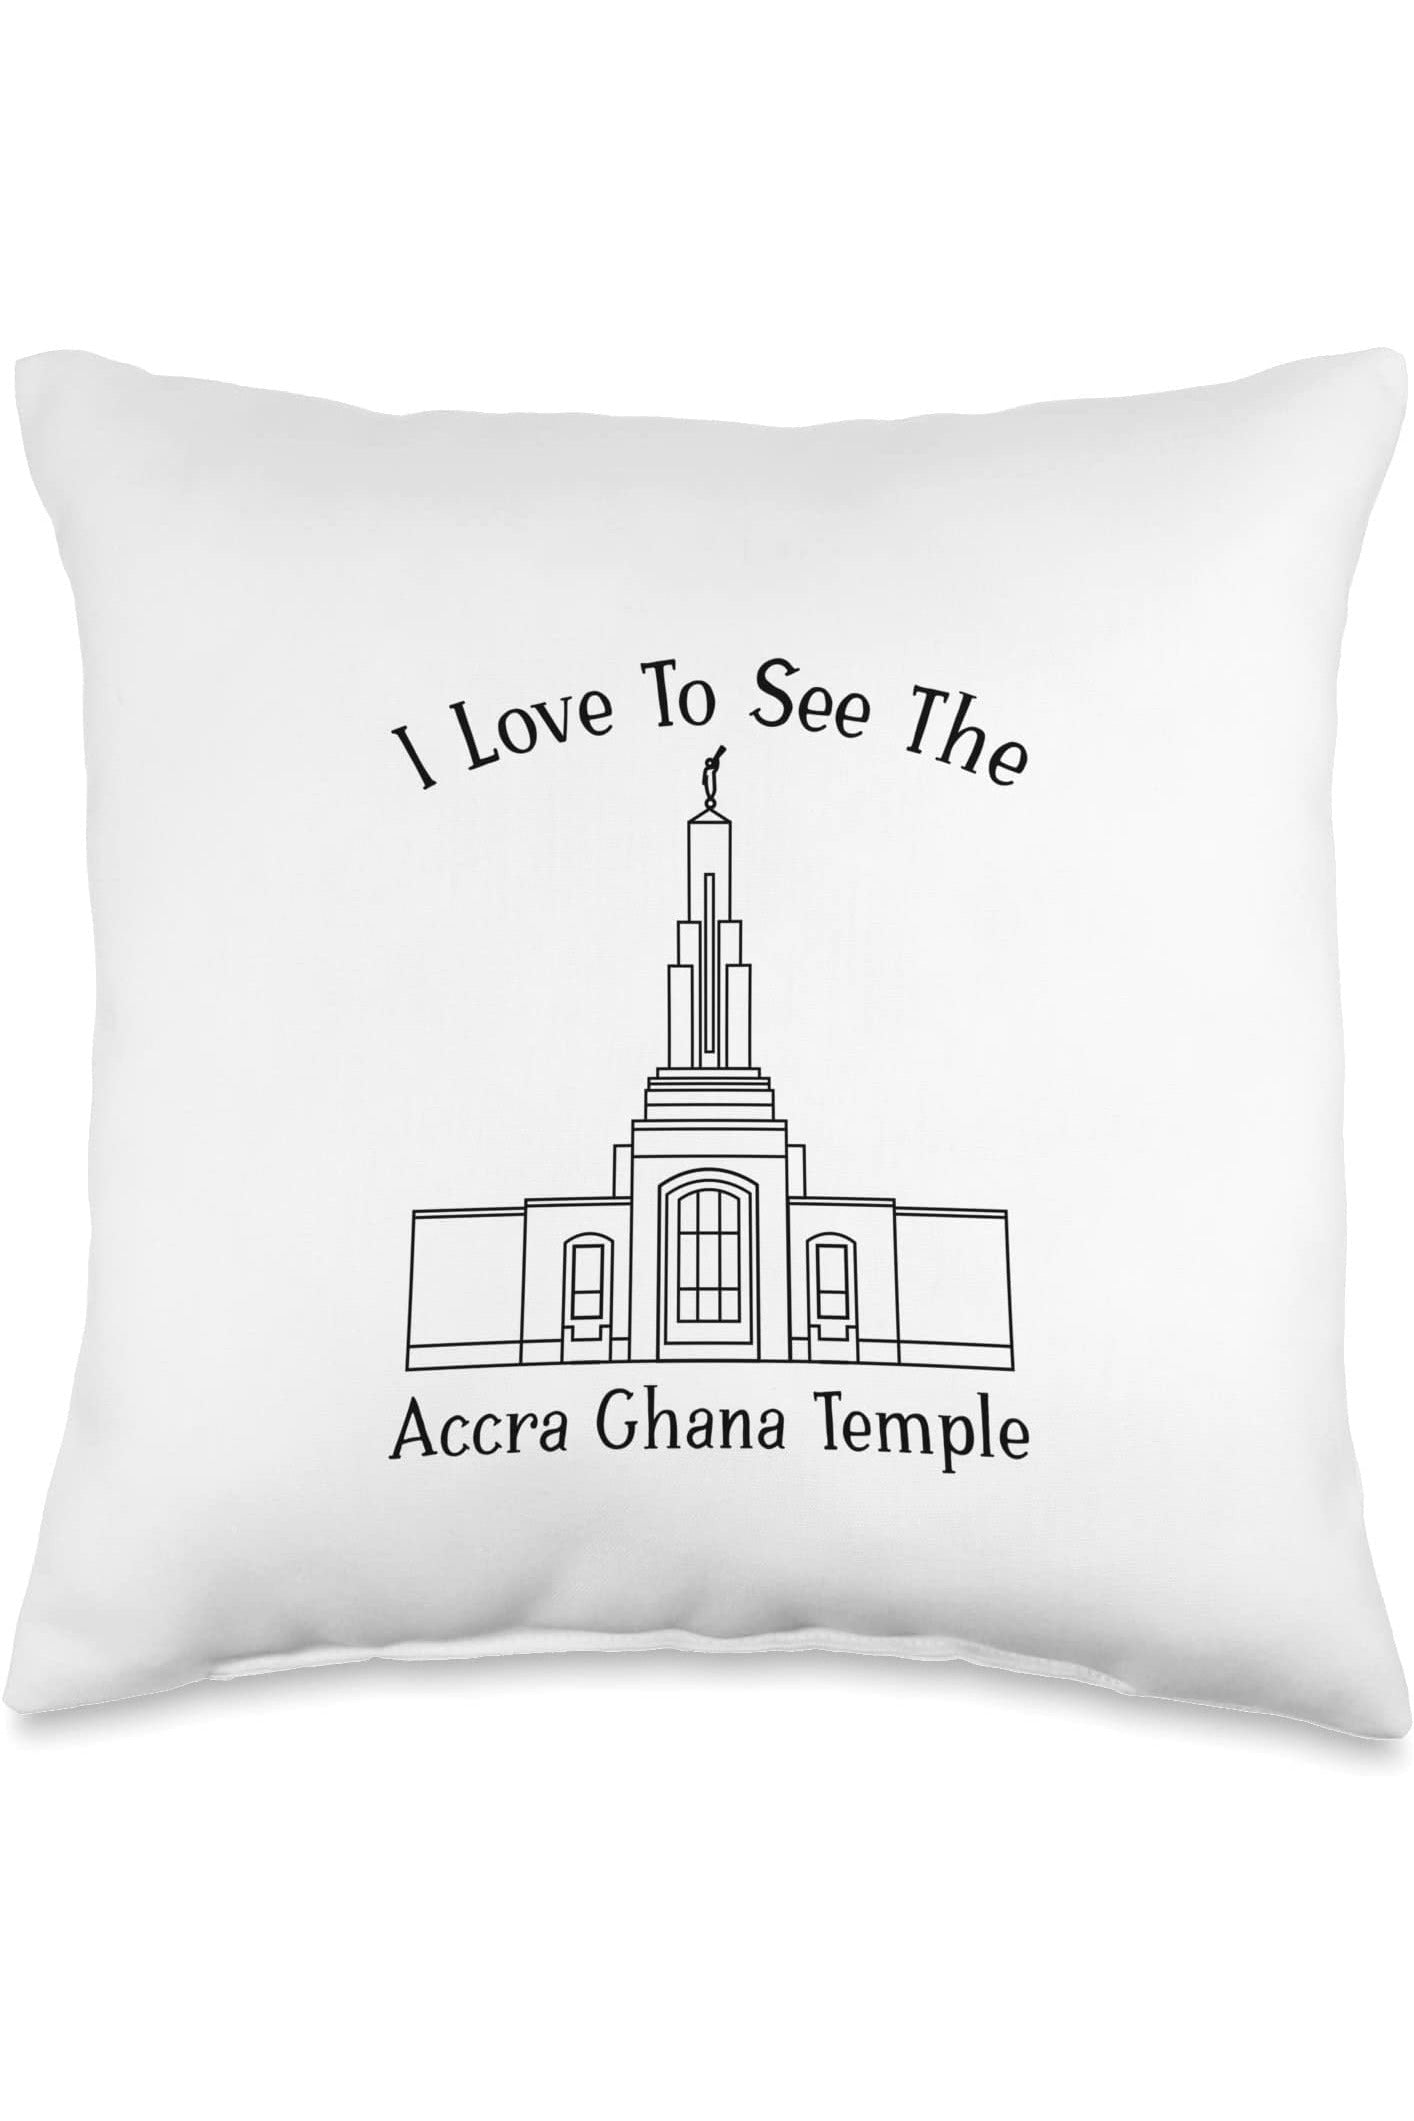 Accra Ghana Temple Throw Pillows - Happy Style (English) US